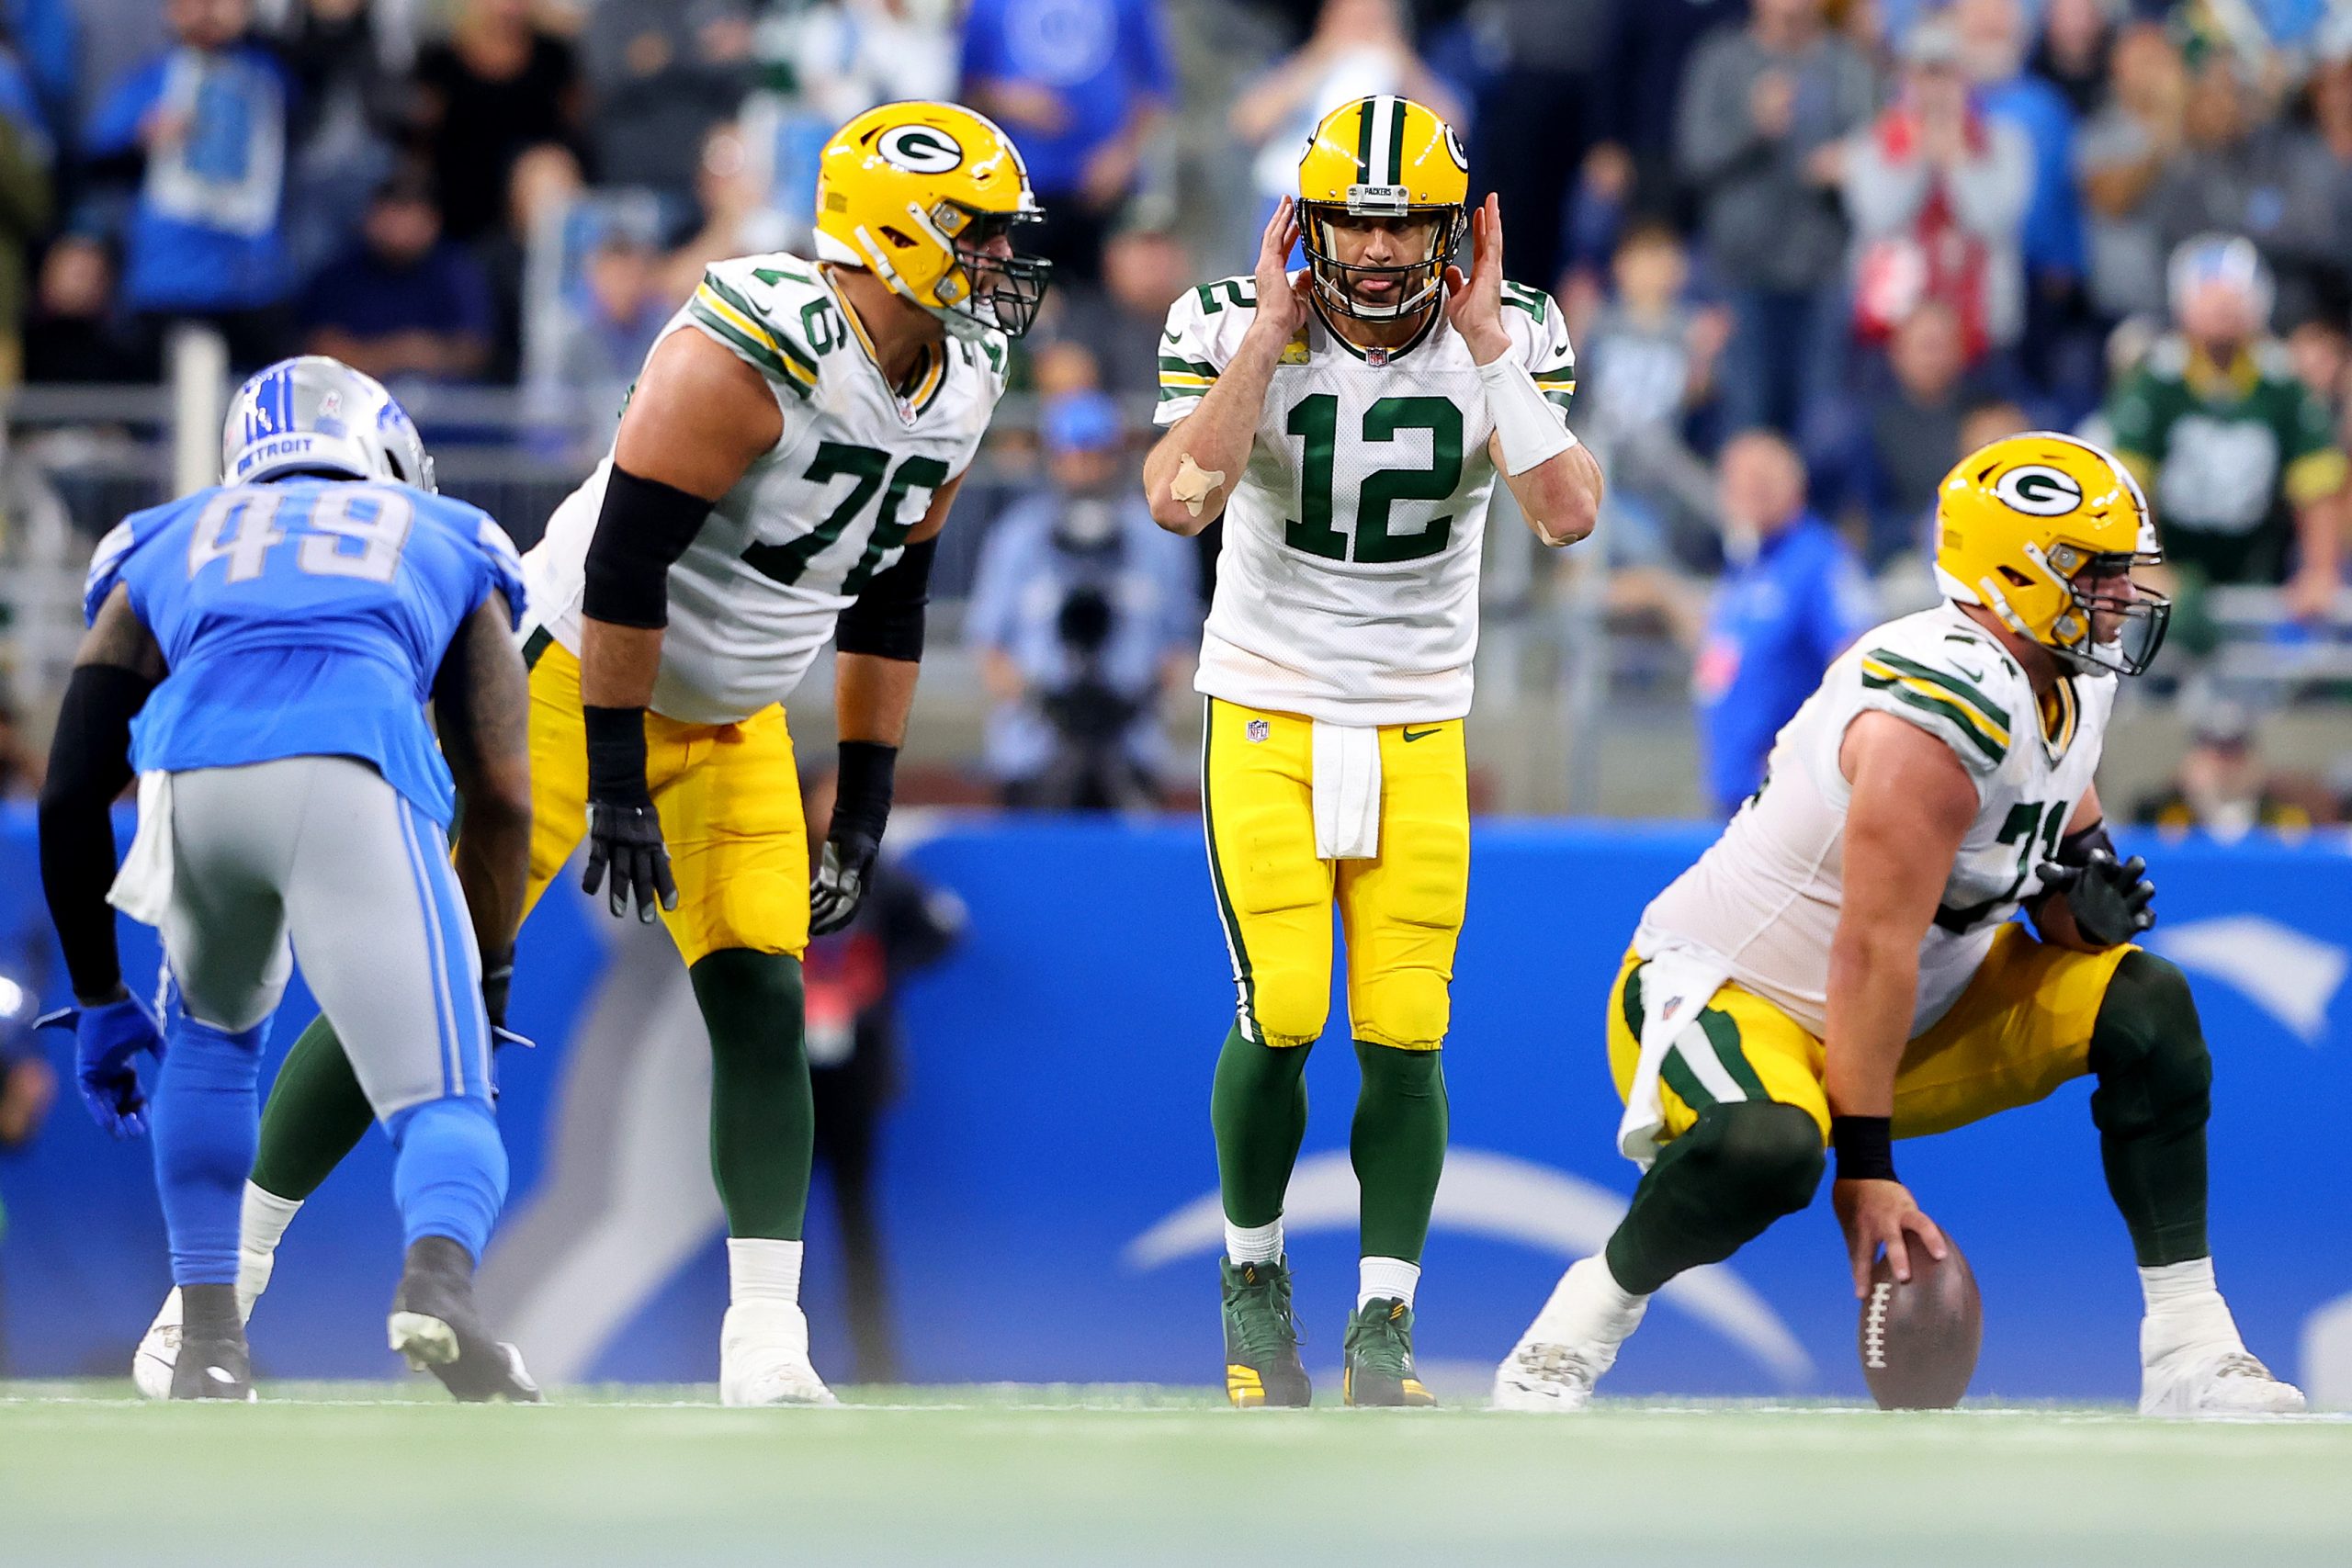 Aaron Rodgers #12 of the Green Bay Packers signals in the fourth quarter of a game against the Detr...